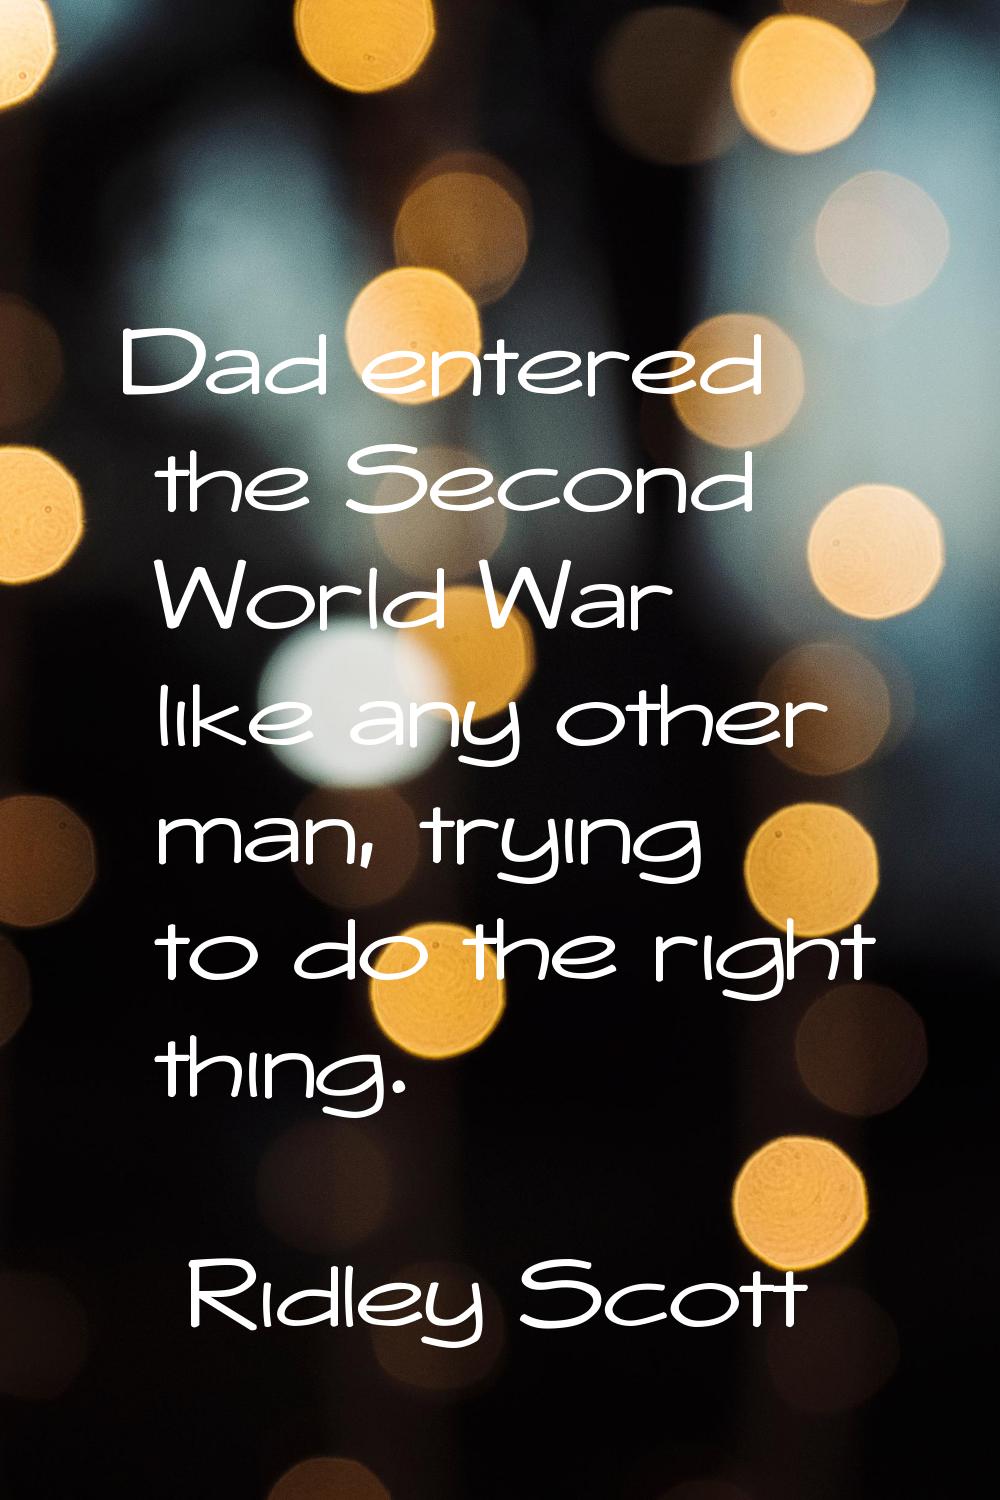 Dad entered the Second World War like any other man, trying to do the right thing.